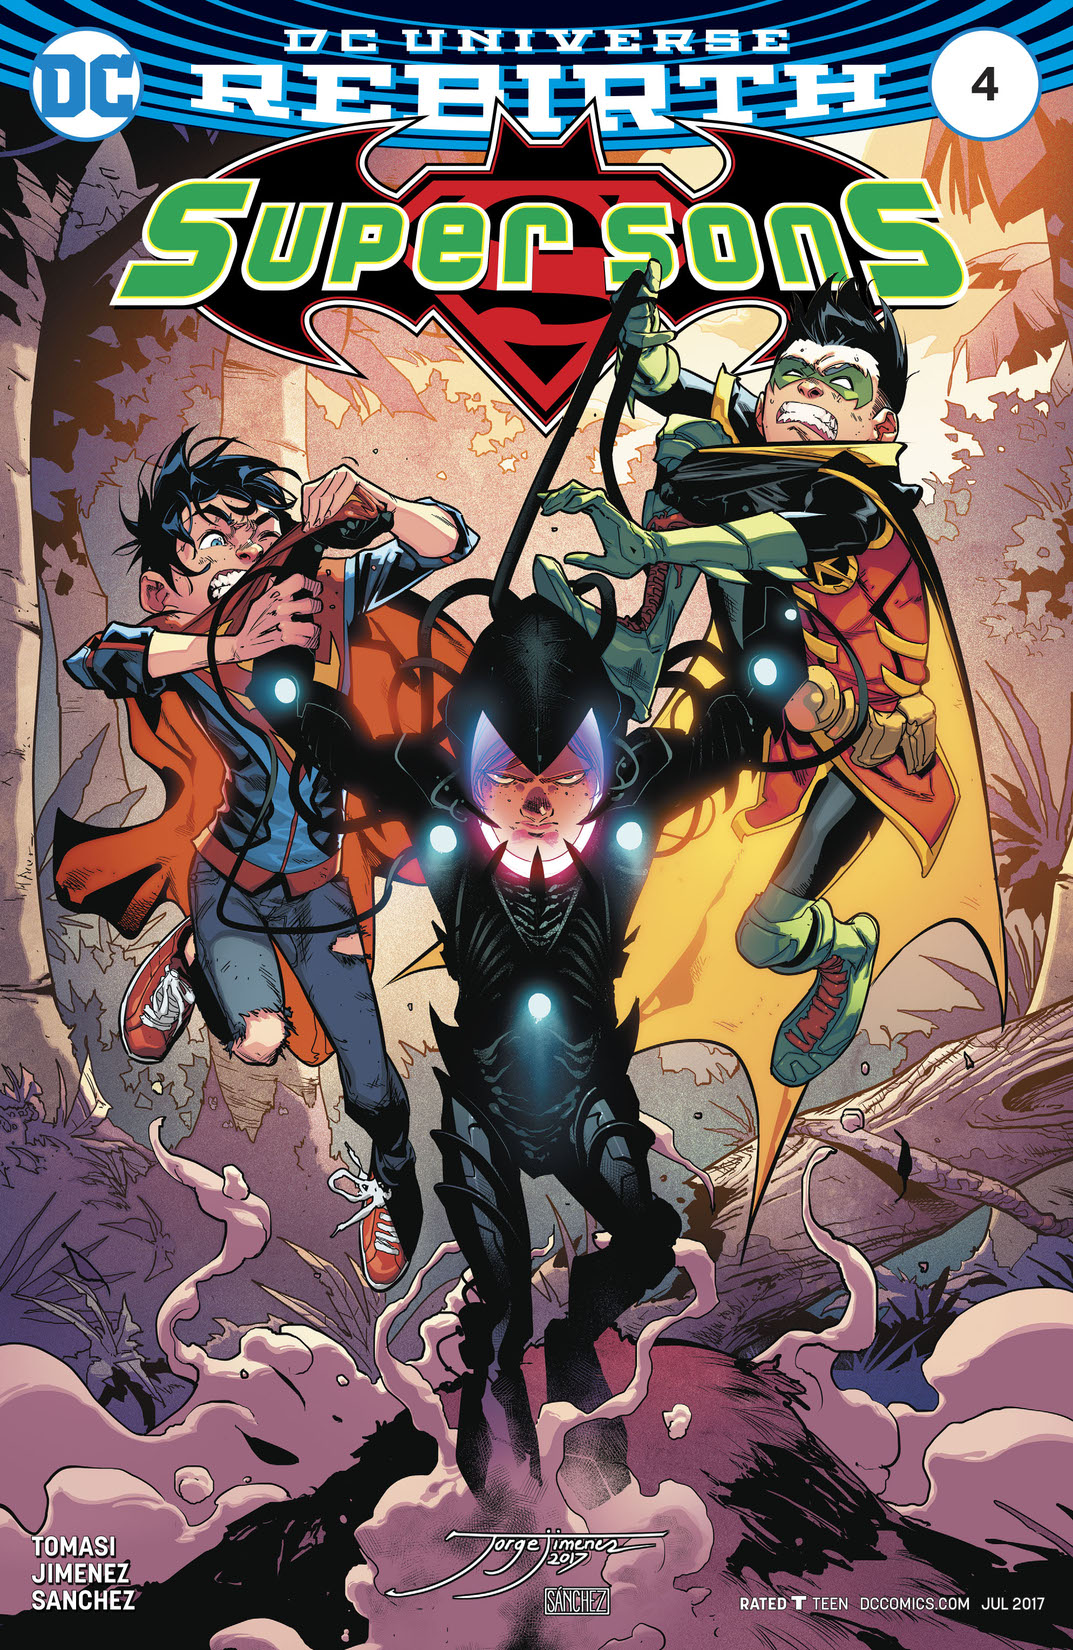 Super Sons (2017-) #4 preview images